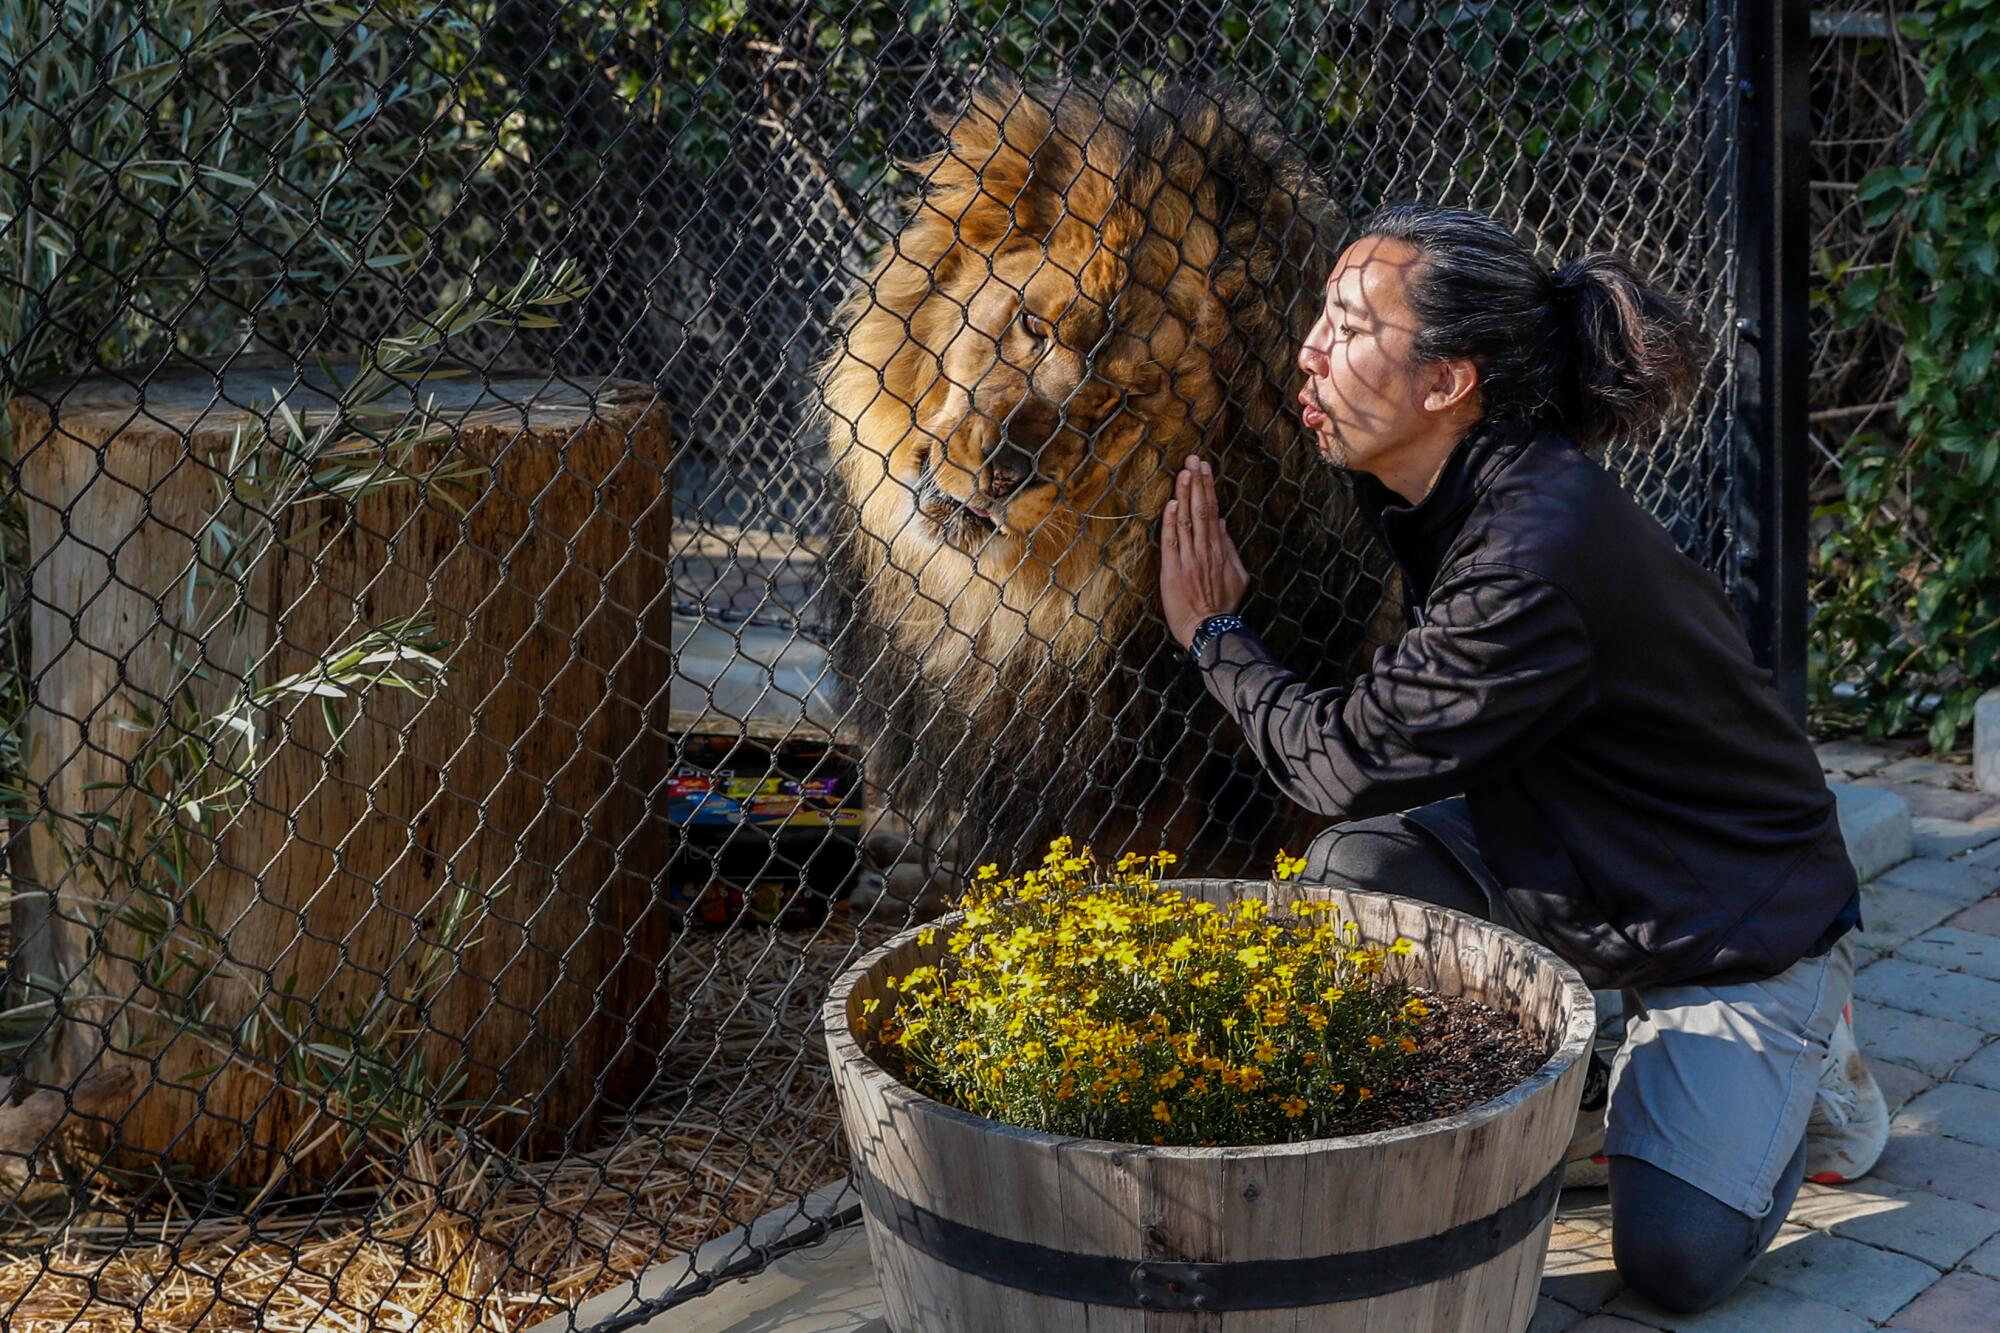 A lion rubs against a chain link fence where a woman kneels to interact with the animal. 